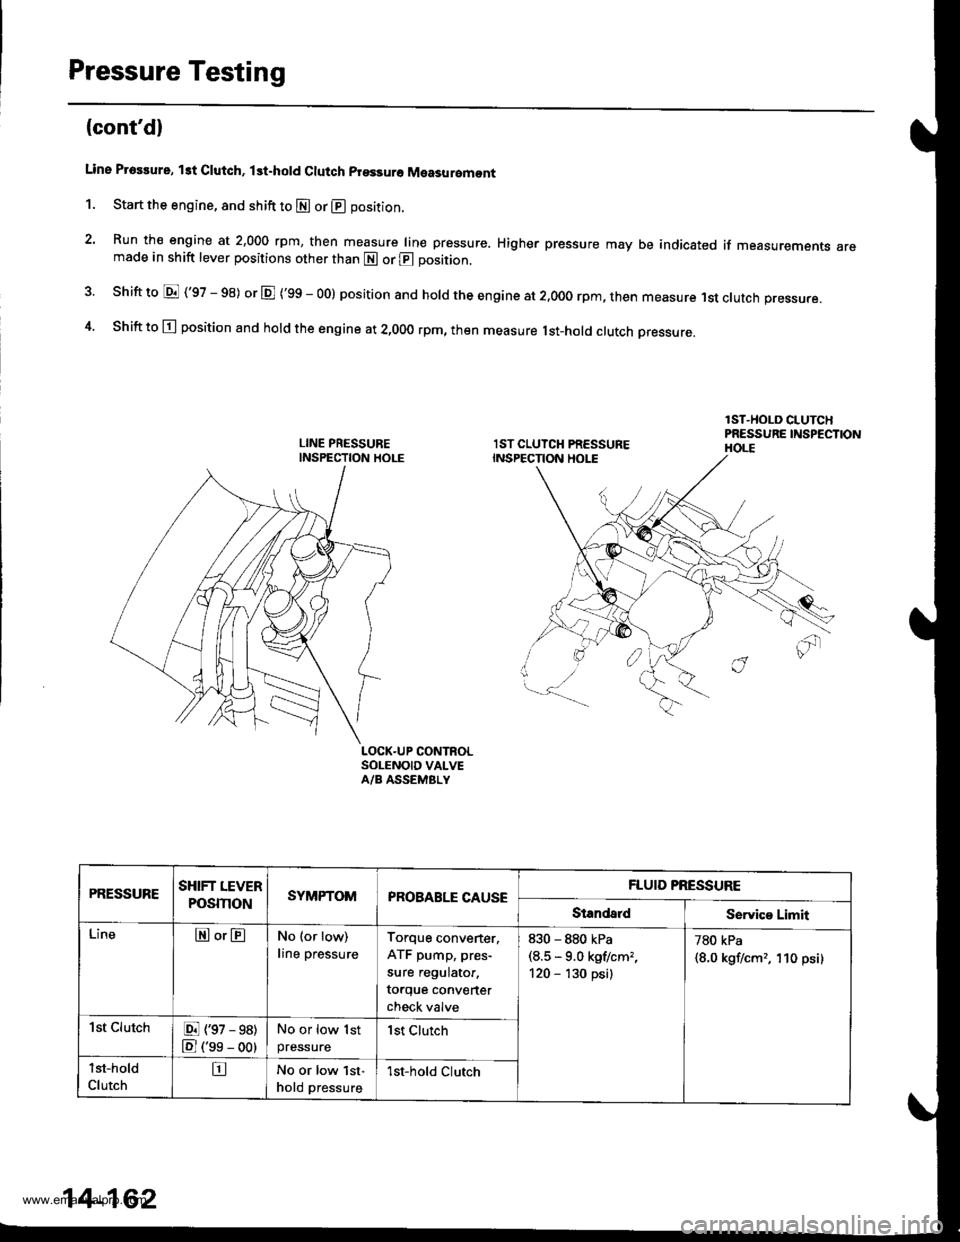 HONDA CR-V 1999 RD1-RD3 / 1.G Owners Manual 
Pressure Testing
(contd)
Line Proslure, lst Clutch, lst.hold Clutch prsssuro Measuromont
1. Start the engine, and shift to E or @ position.
2. Run the engine at 2,000 rpm, then measure line pressure